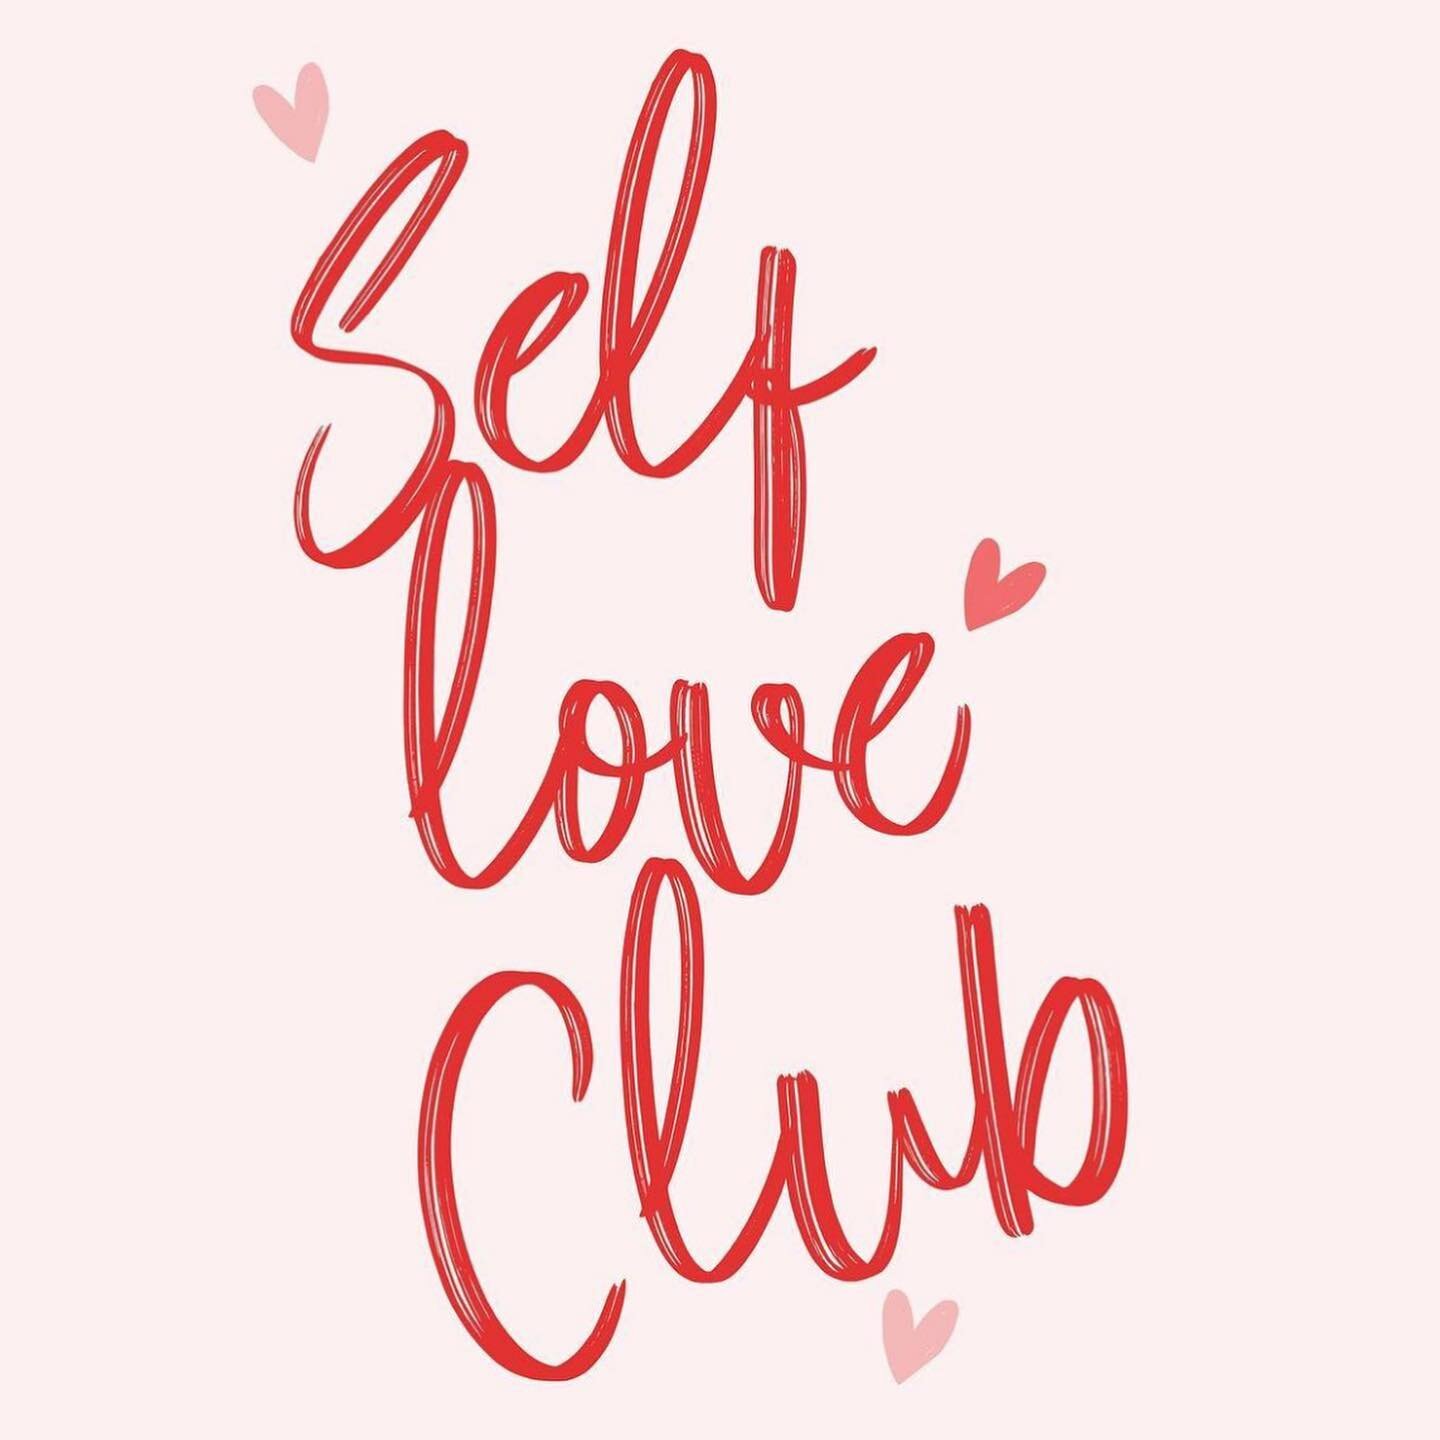 Happy Love Day! ❣️

This your reminder to pour into the most important relationship you have. The intrapersonal relationship you have with yourself sets the tone for every interpersonal relationship you will develop in your lifetime. Self love isn&rs